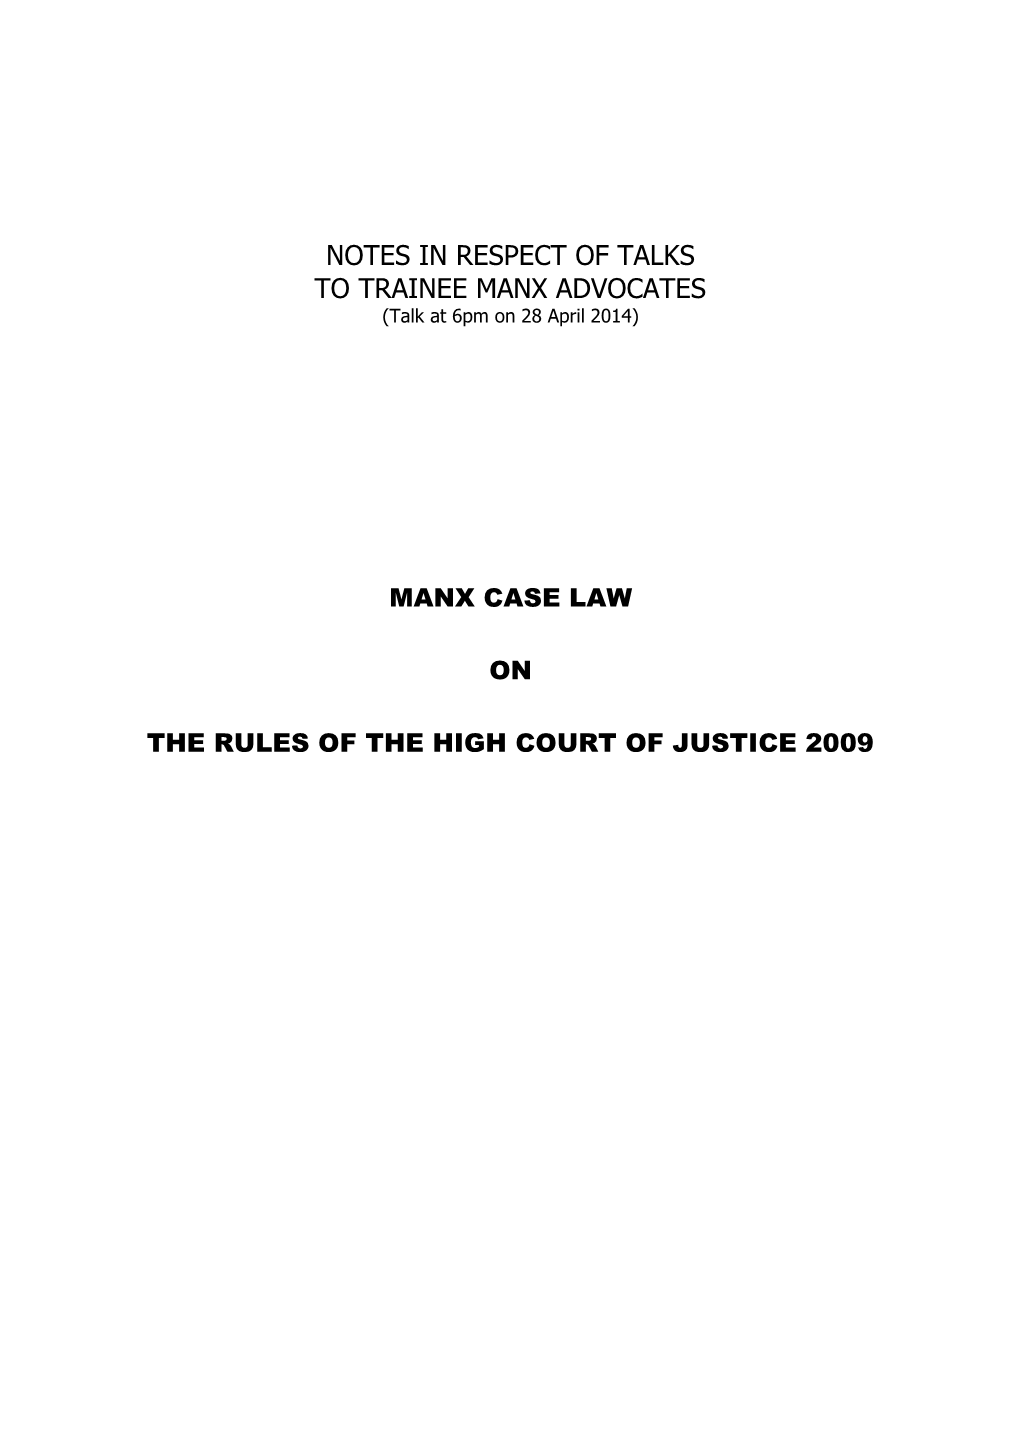 NOTES in RESPECT of TALKS to TRAINEE MANX ADVOCATES (Talk at 6Pm on 28 April 2014)